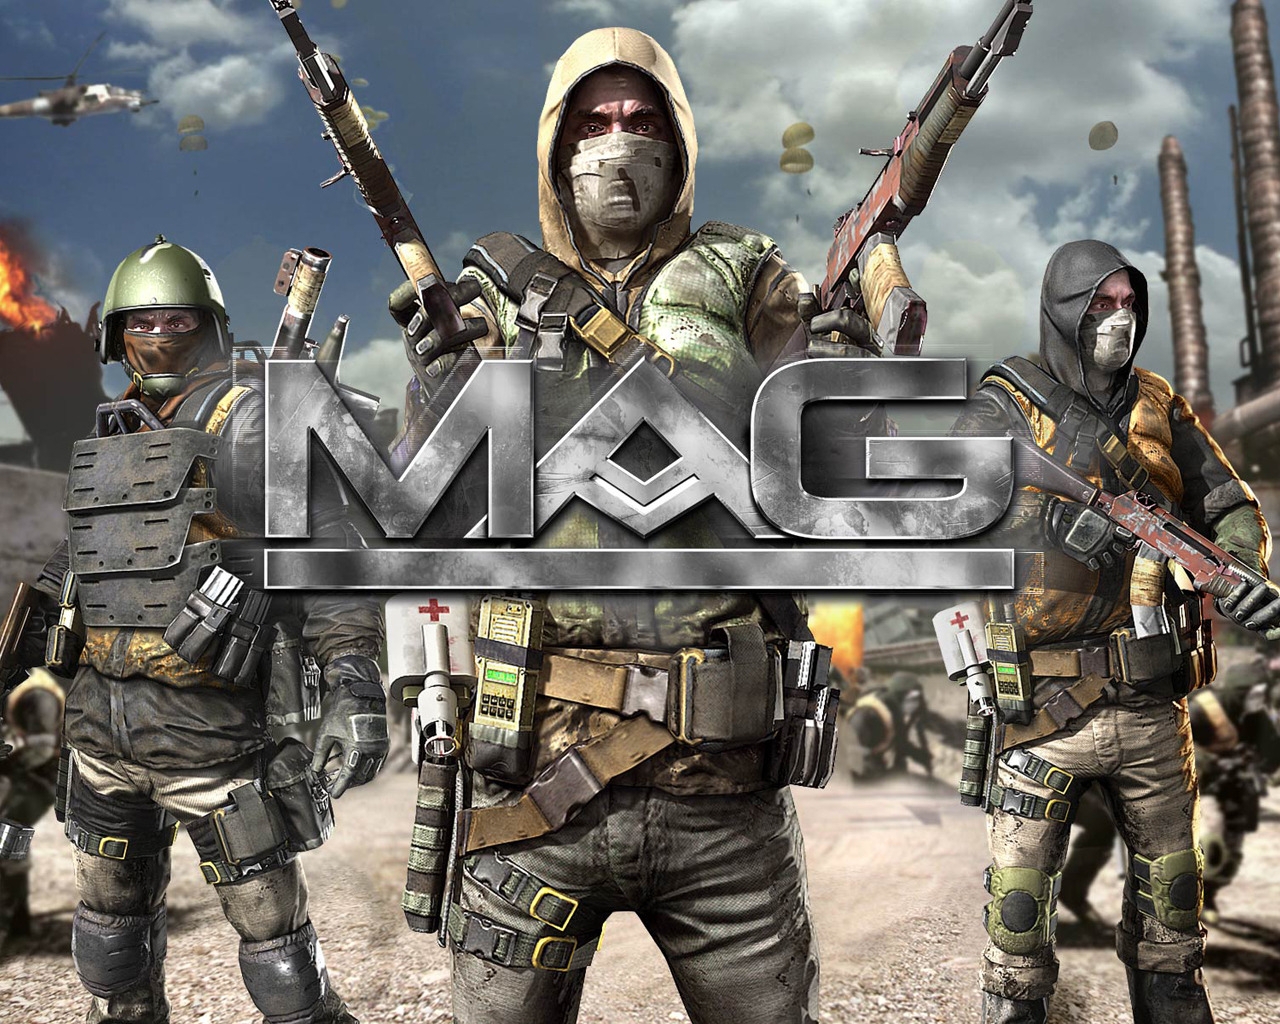 MAG Game for 1280 x 1024 resolution